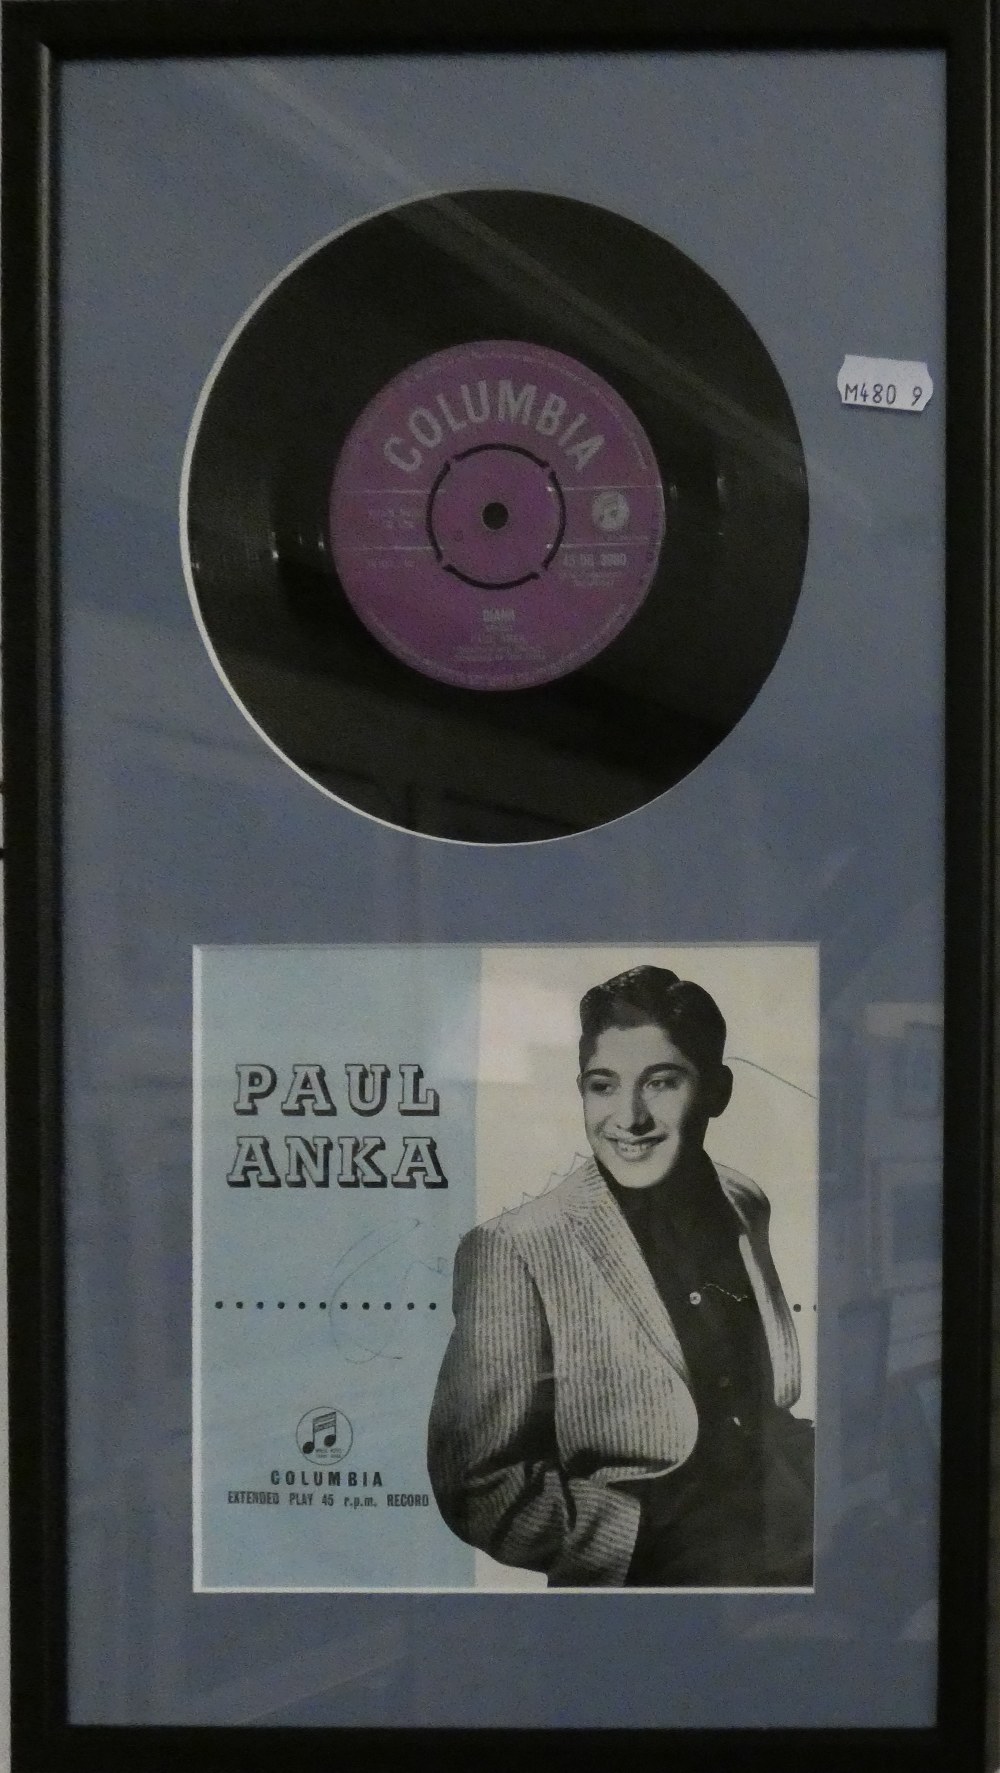 A signed and framed photograph and 45RPM record by Paul Anka, featuring 'Diana', together with a - Image 3 of 3